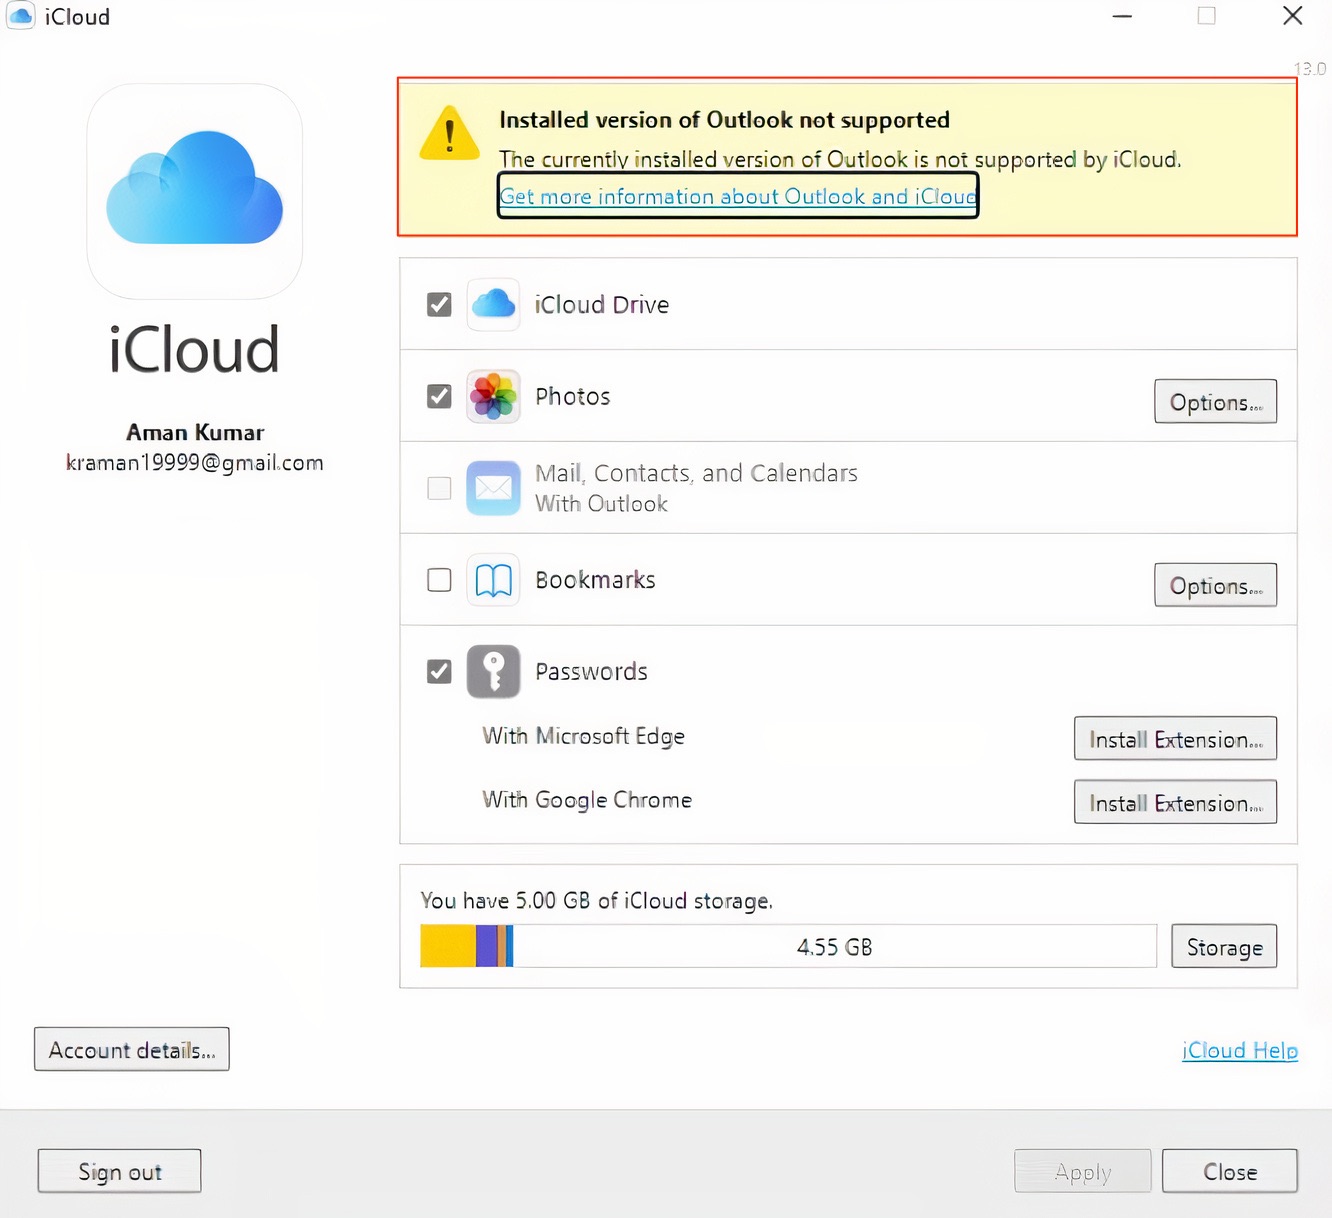 The currently installed version of Outlook is not supported by iCloud